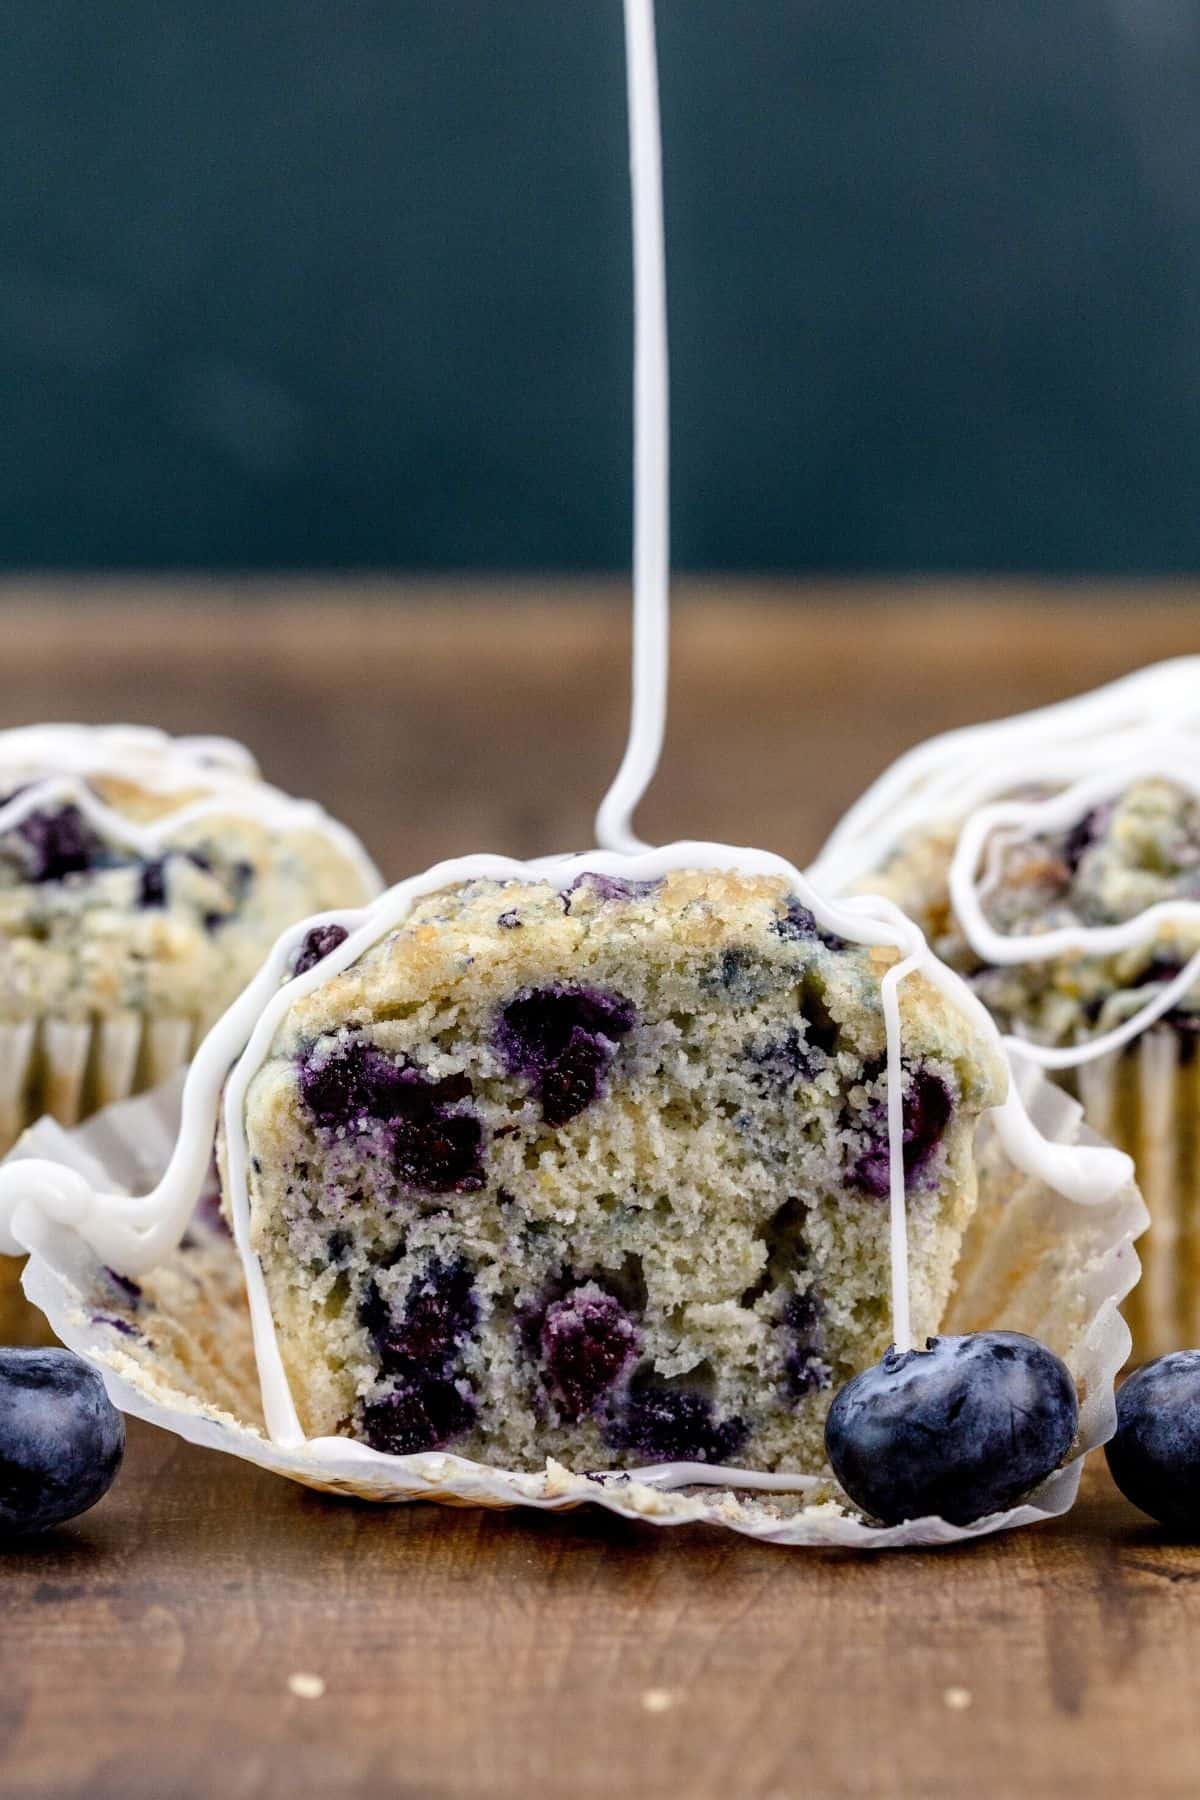 3 blueberry muffins on a wood table with fresh blueberries. The muffin in front has been cut in half so you can see the texture and crumb of the muffin. A white drizzle of icing is slowly being poured over the muffins.